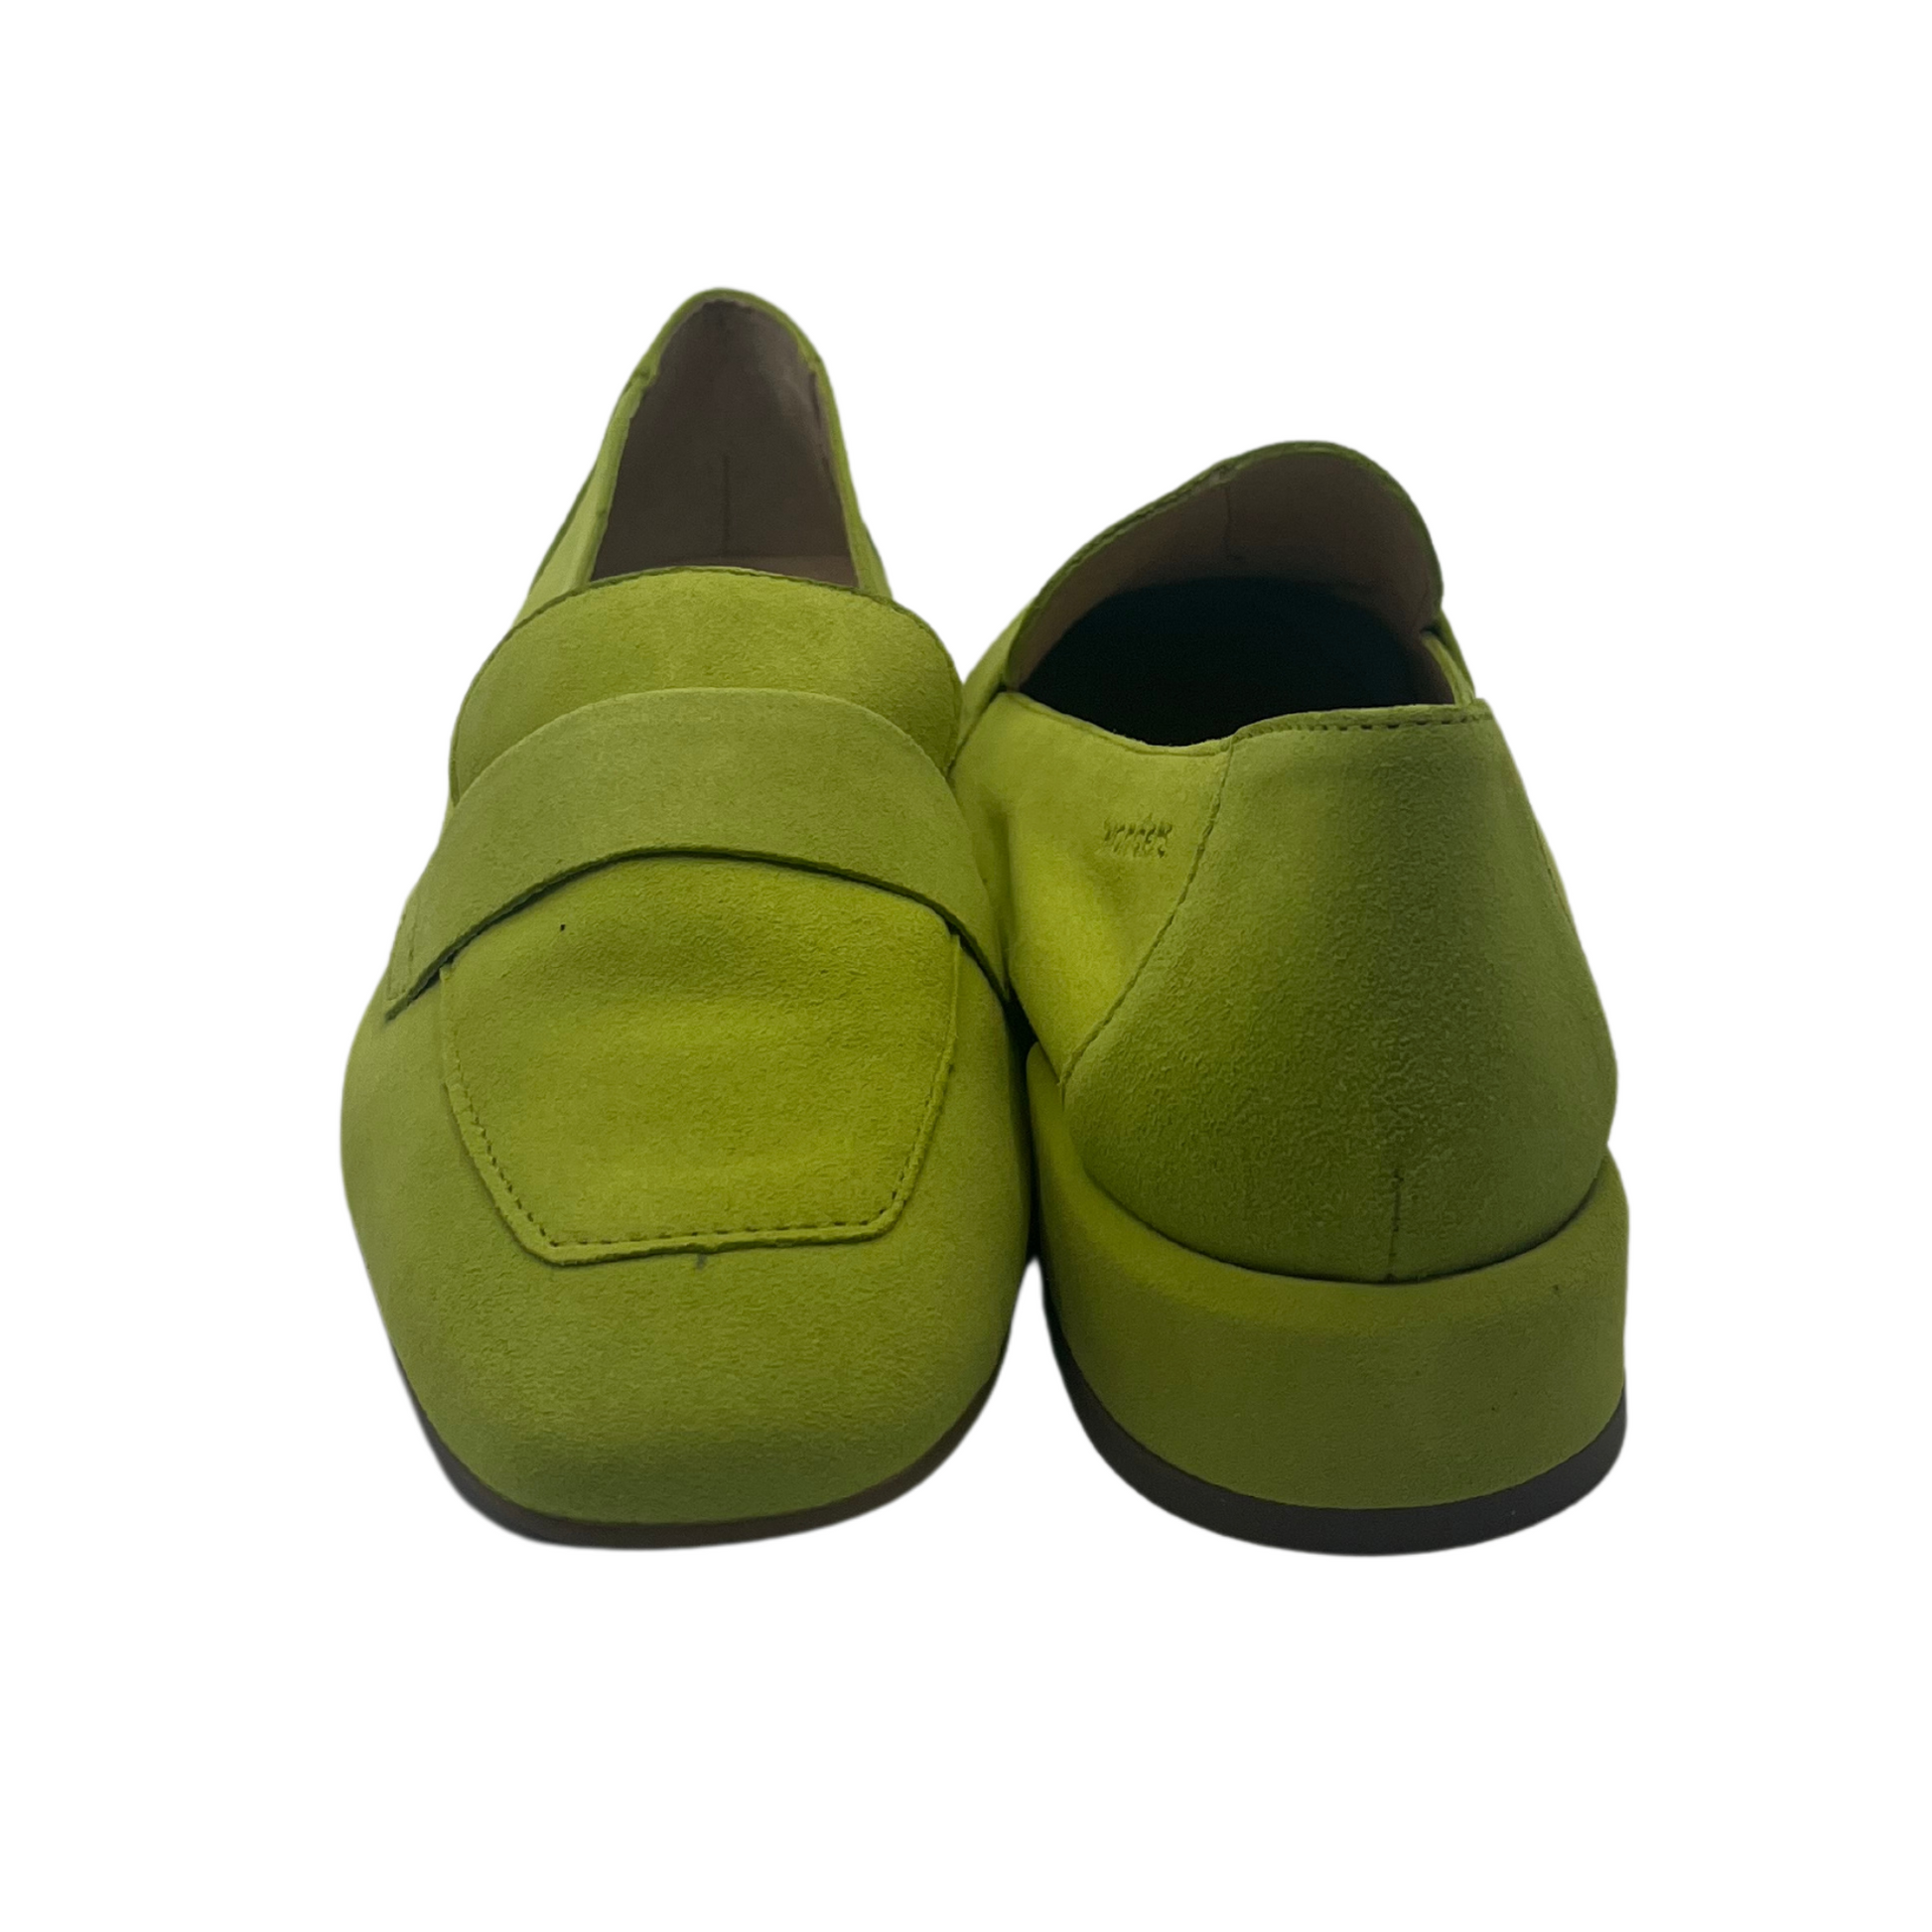 View of a pair of green apple suede leather loafer with short block heel